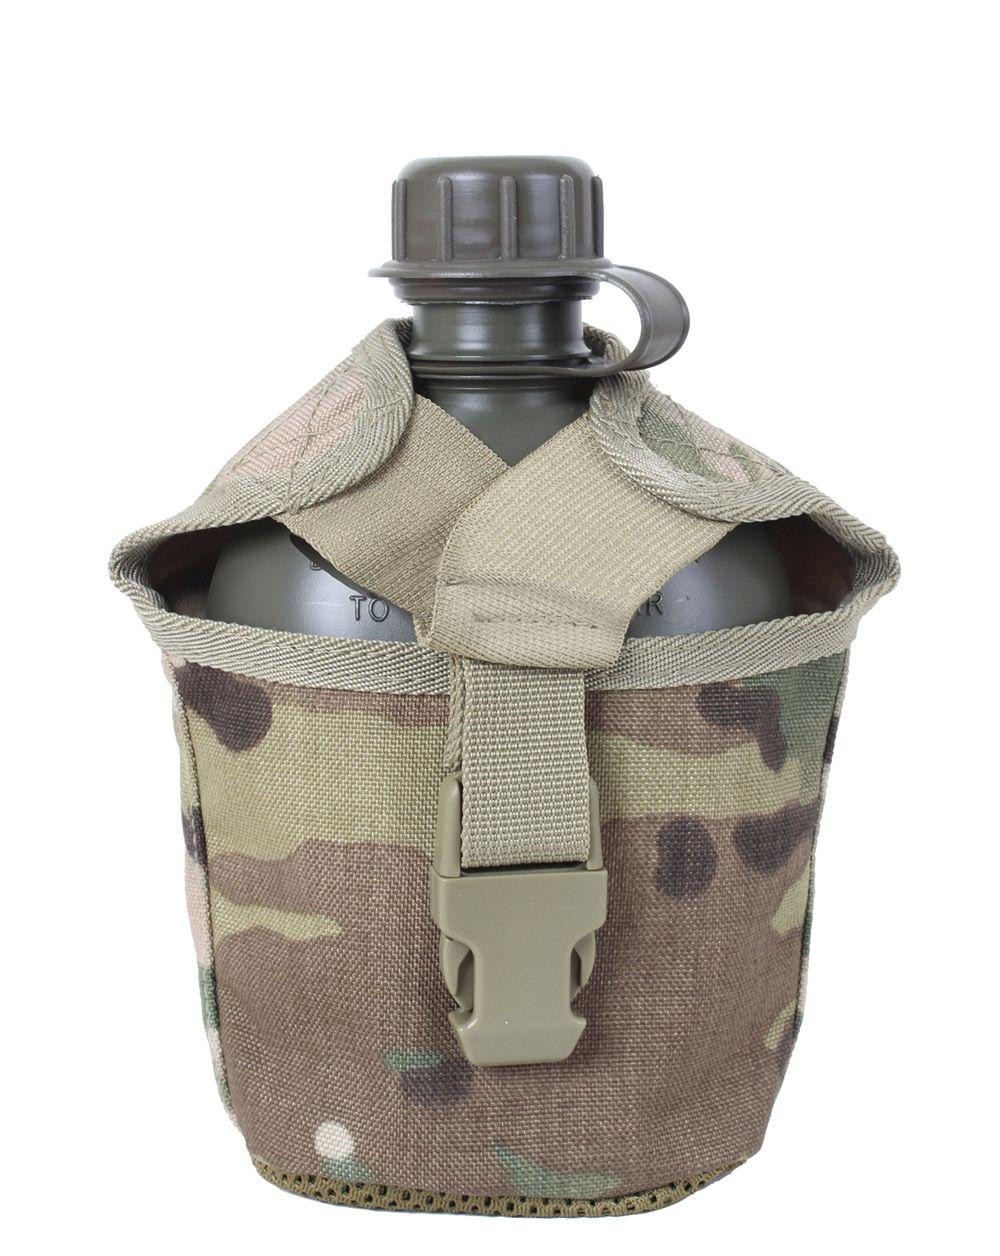 7: Rothco Canteen Cover - MOLLE-Kompatibel (Multicam, One Size)